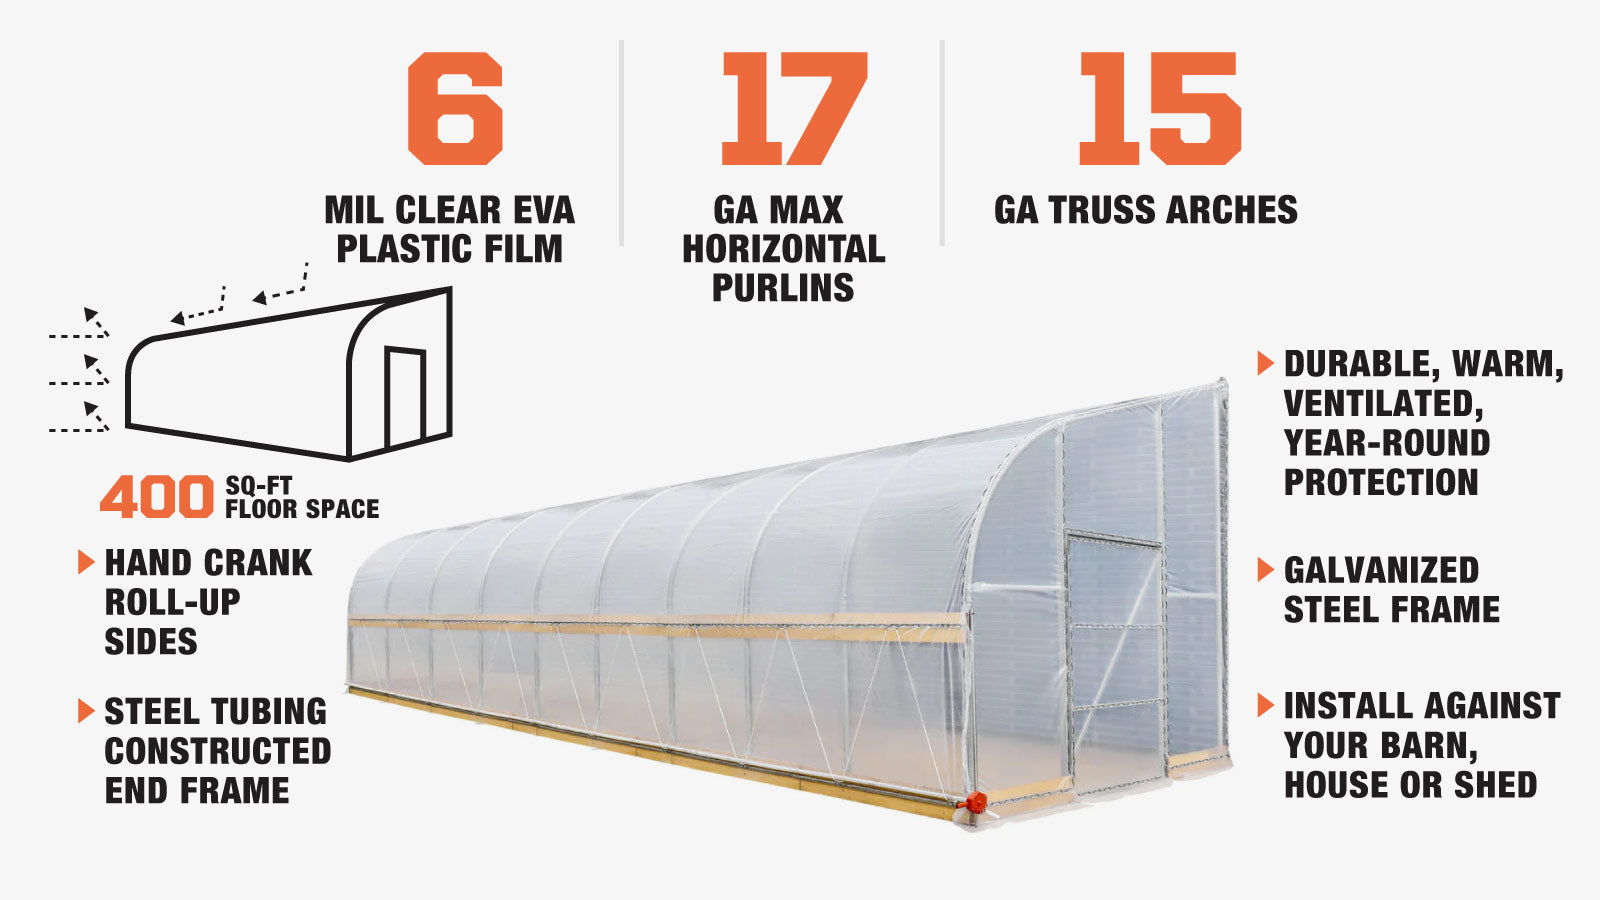 TMG Industrial 10' x 40' Lean-To Greenhouse Grow Tent w/6 Mil Clear EVA Plastic Film, Cold Frame, Manivelle Roll-Up Side, 6-½' Sidewall, TMG-GHL1040-description-image